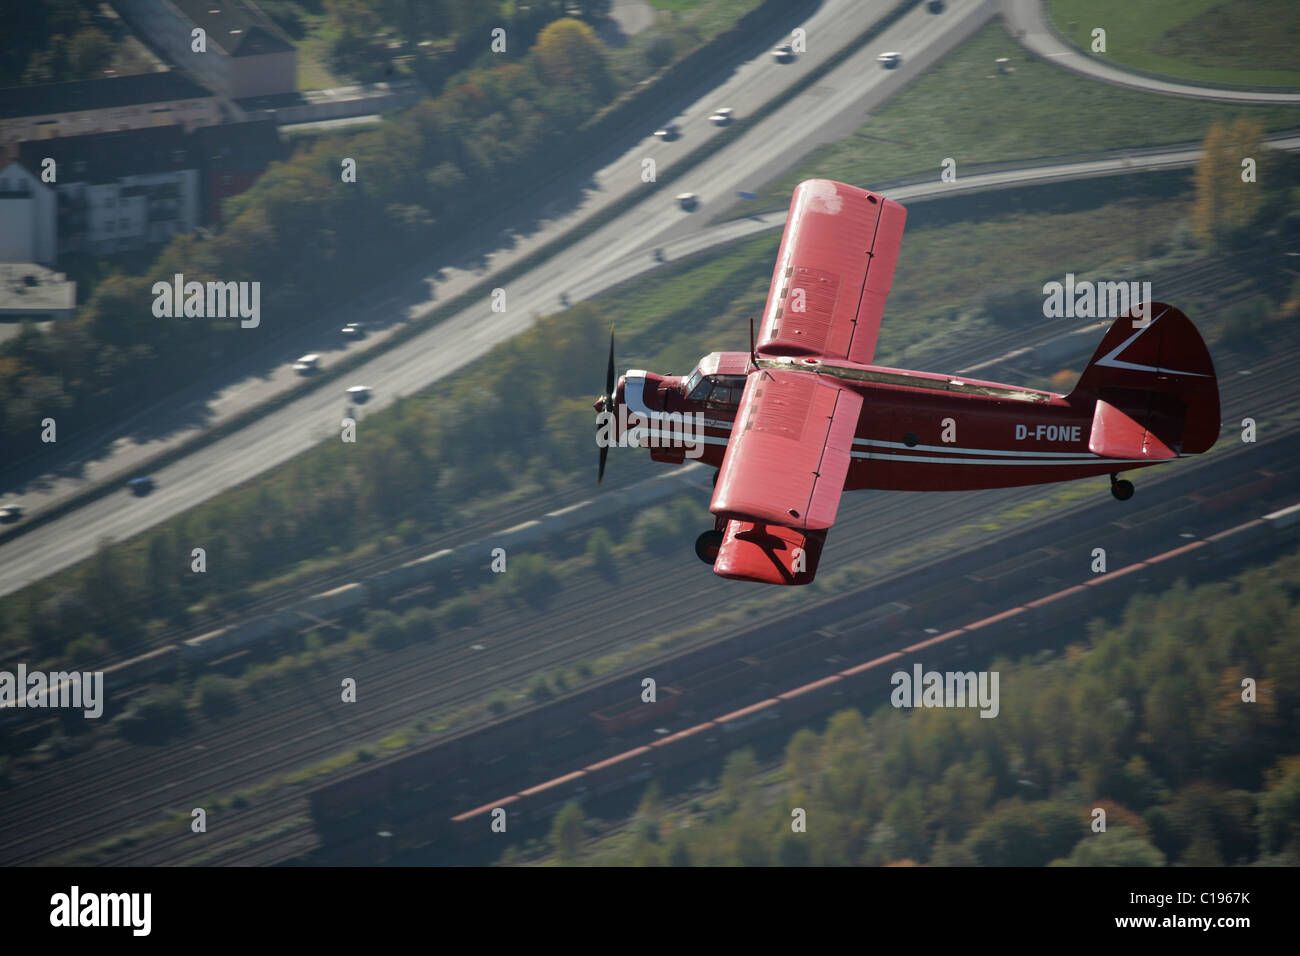 Aerial photograph, motorway, red double decker aircraft, oldtimer, veteran airplane, historical airplane, Antonow double decker Stock Photo